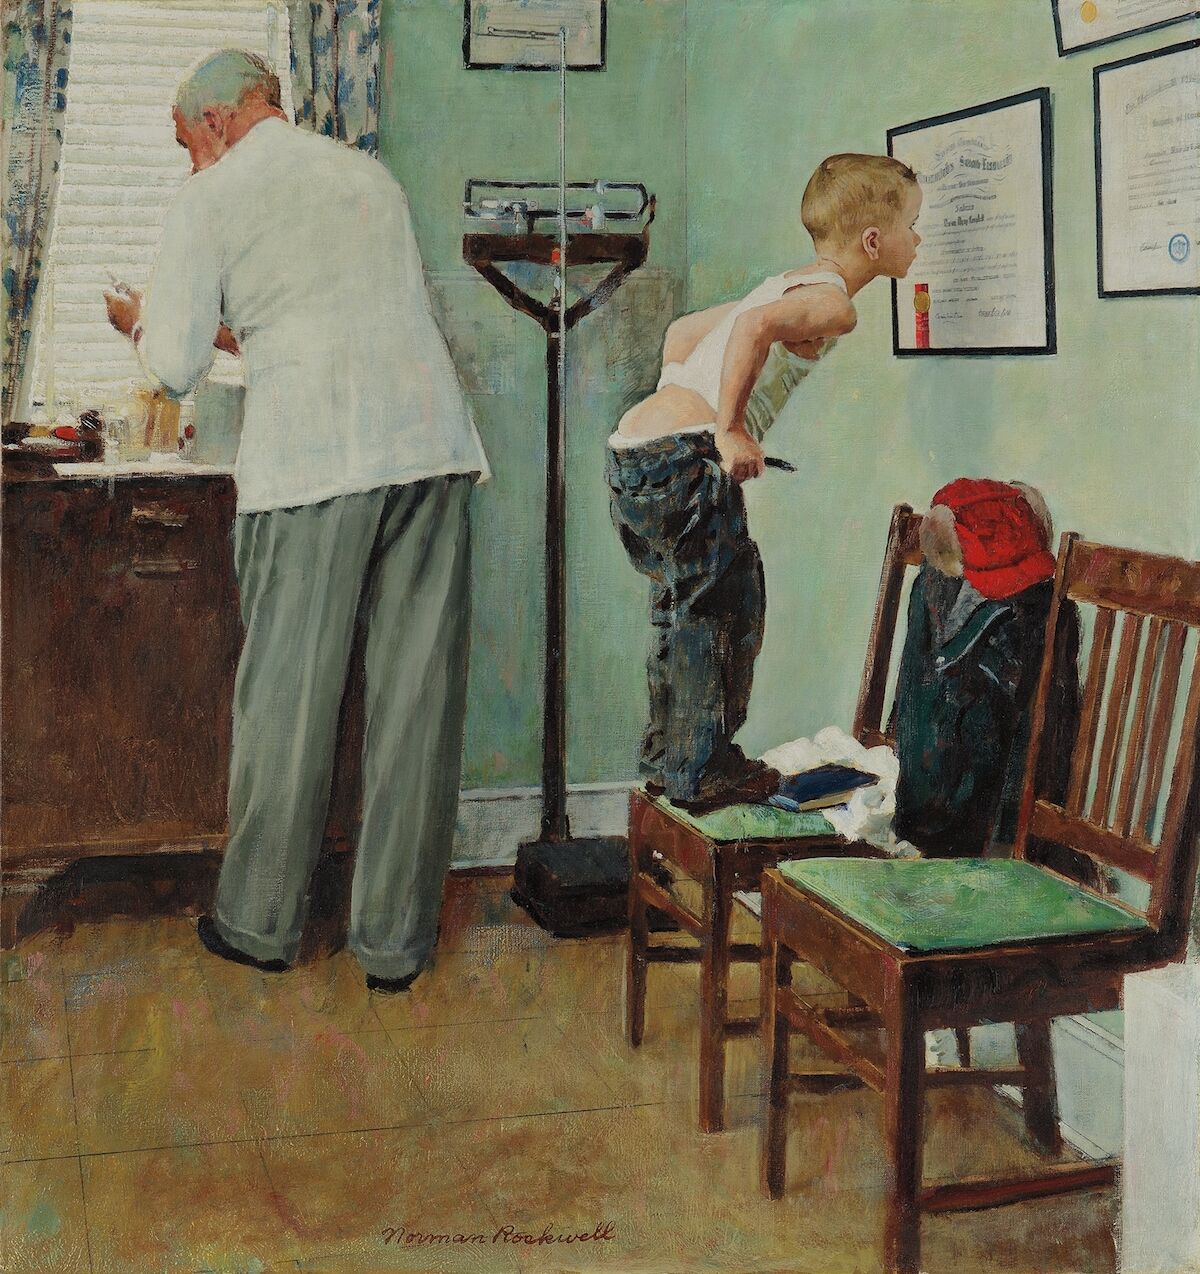 Norman Rockwell, Before the Shot, 1958. Sold for $4.7 million. Courtesy Phillips.